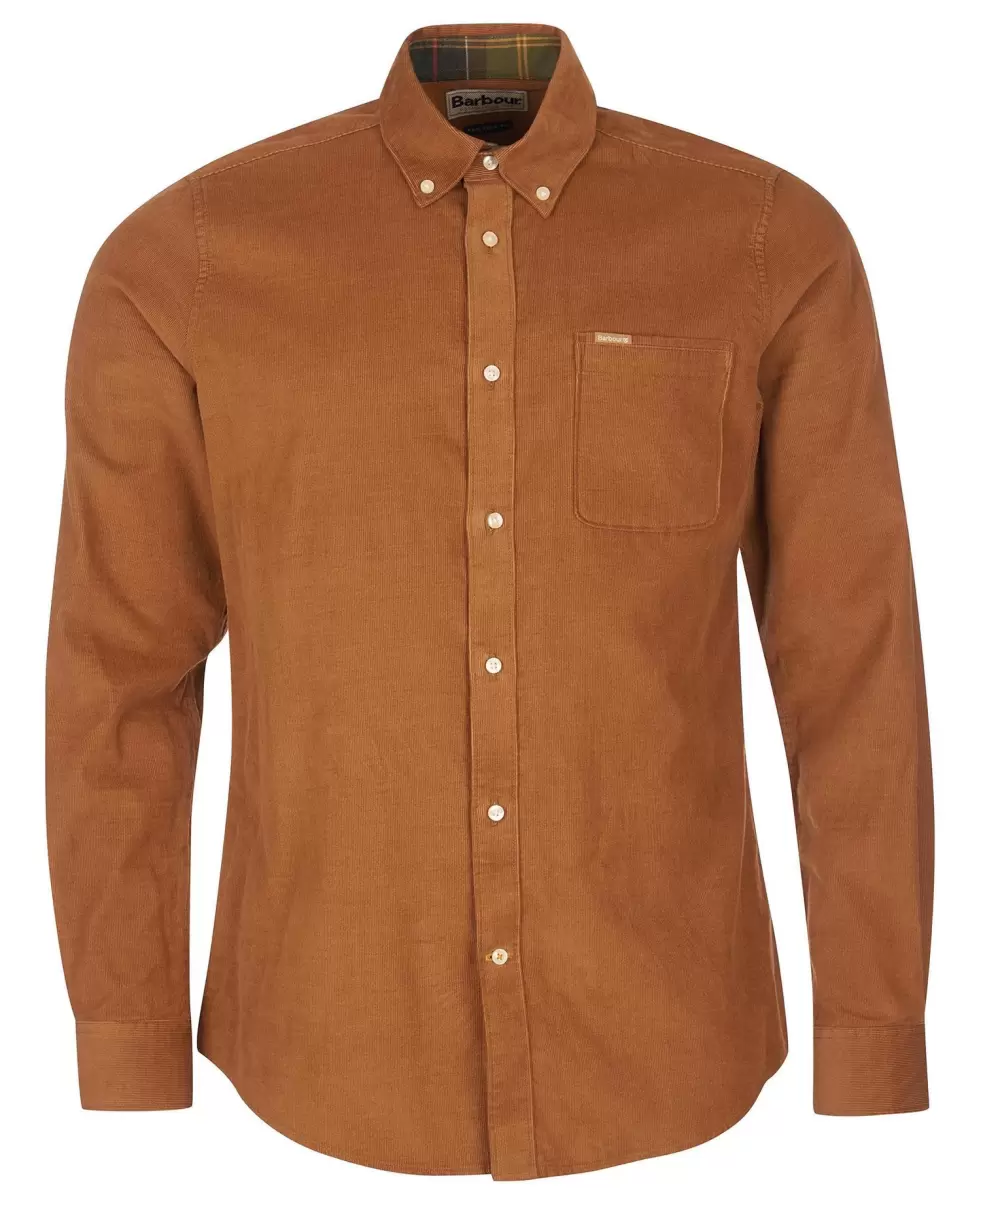 Efficient Forest Shirts Men Barbour Ramsey Tailored Shirt - 1